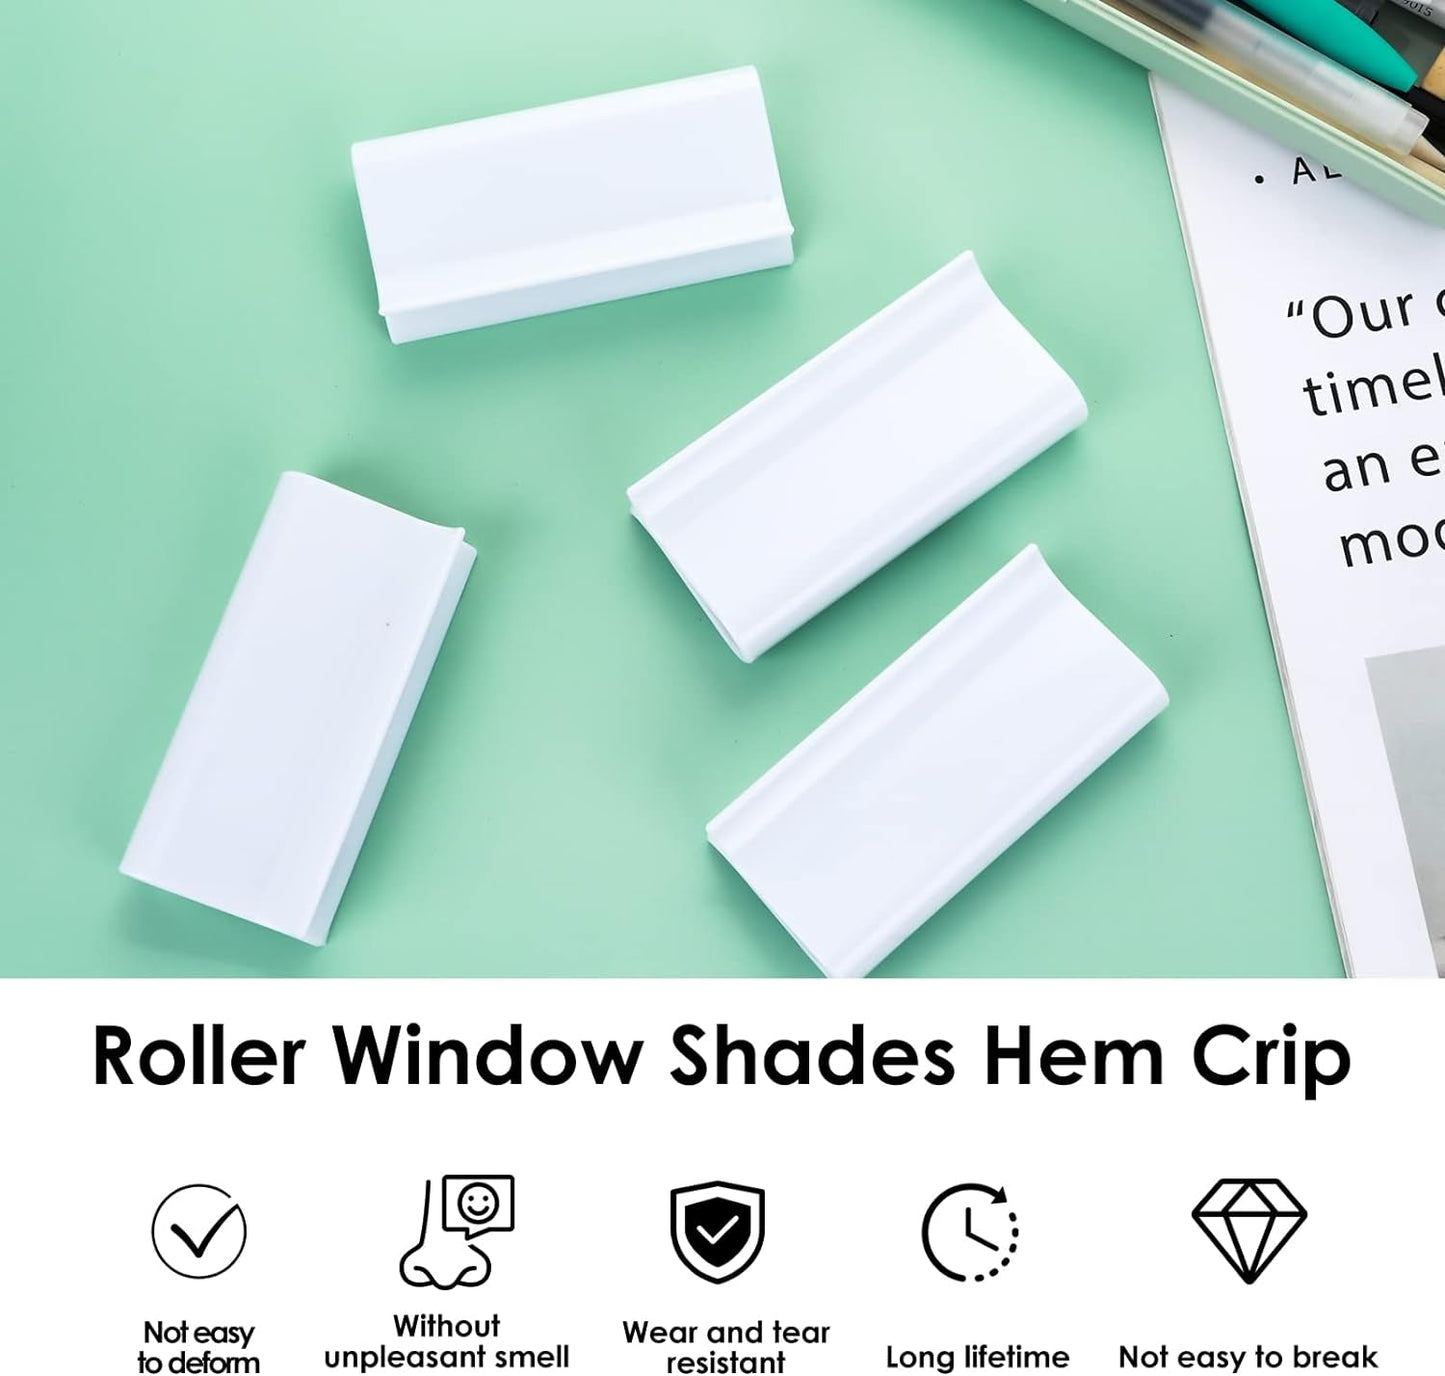 4 Pieces Roller Shade Pulls, Window Shade Pulls Window Blinds Cordless Roller Blinds Shades R Type Lifting Clamp Pull Shade Grips for Roller Shades Window Blinds Rolling Curtain Accessories